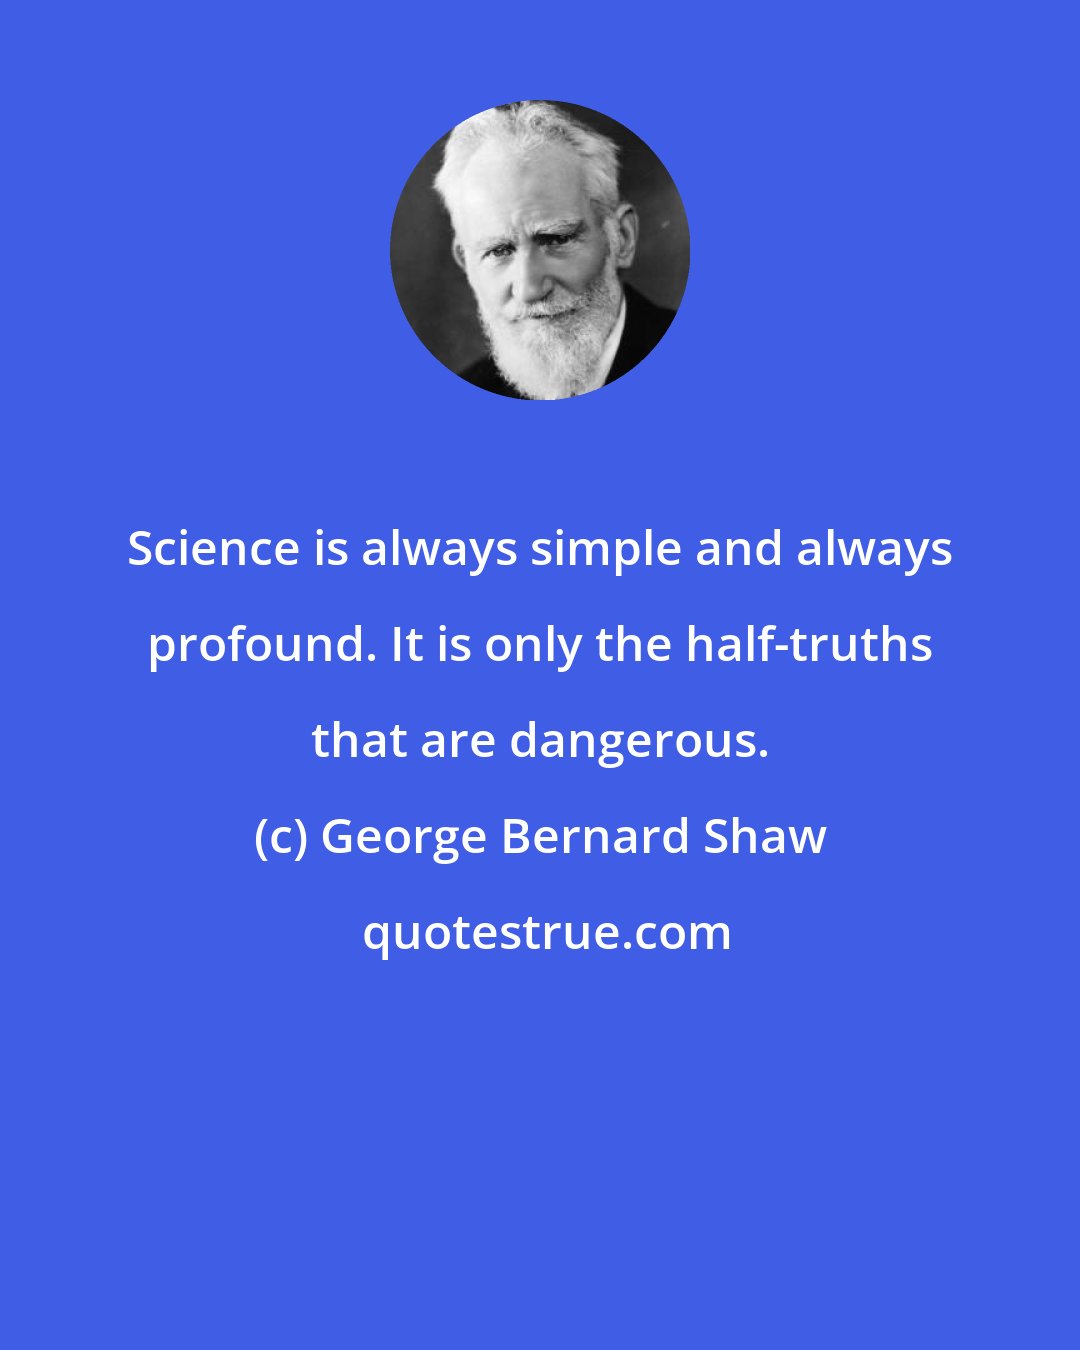 George Bernard Shaw: Science is always simple and always profound. It is only the half-truths that are dangerous.